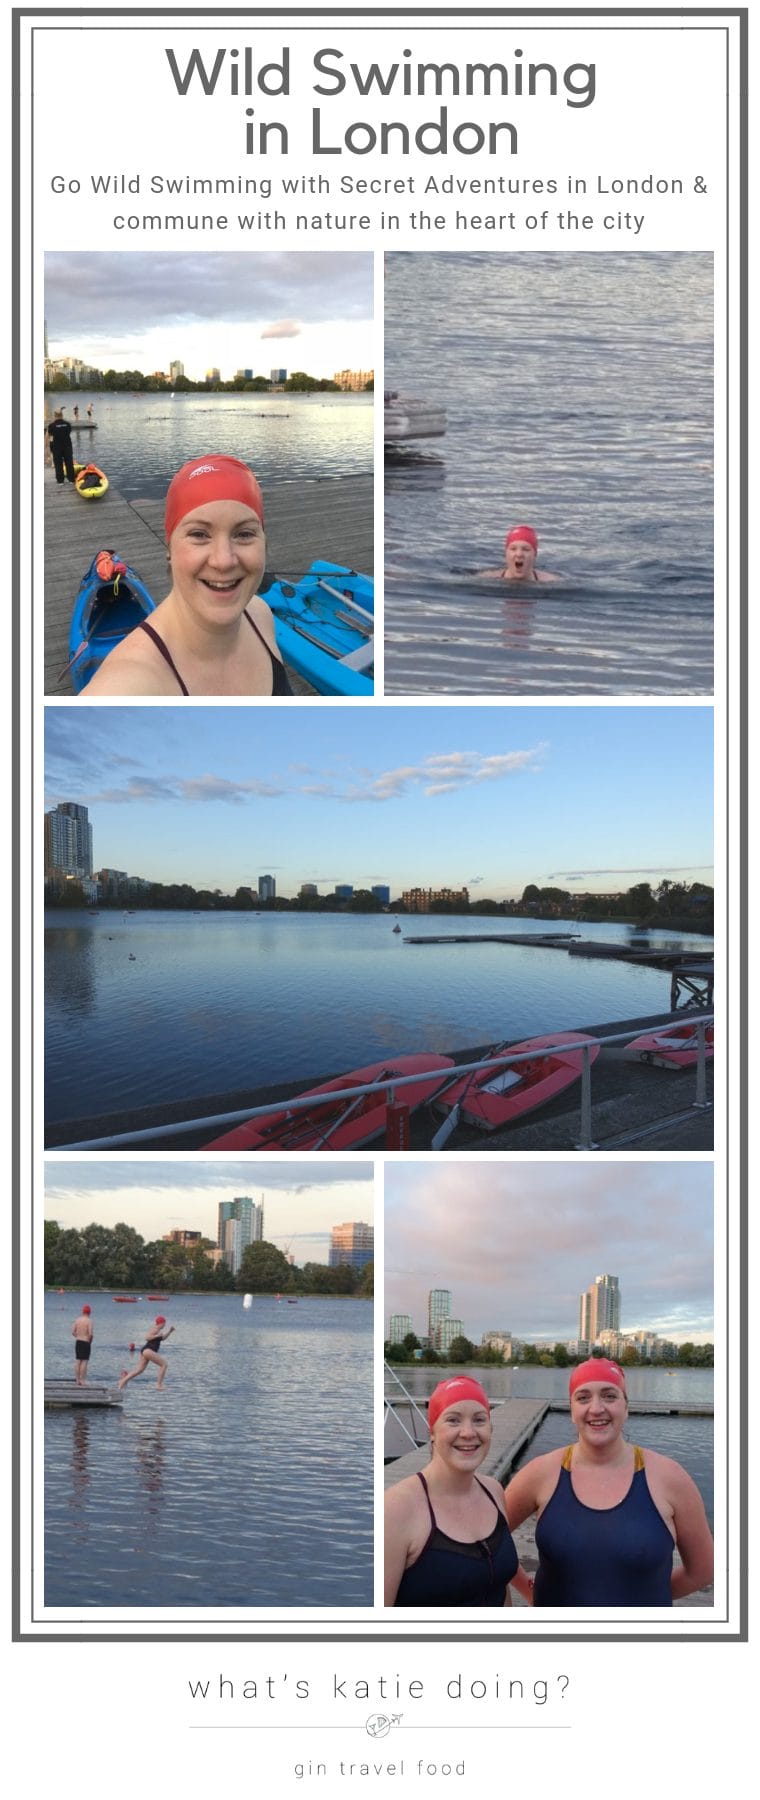 Wild Swimming in London, with Secret Adventures the 'cool' thing to do!